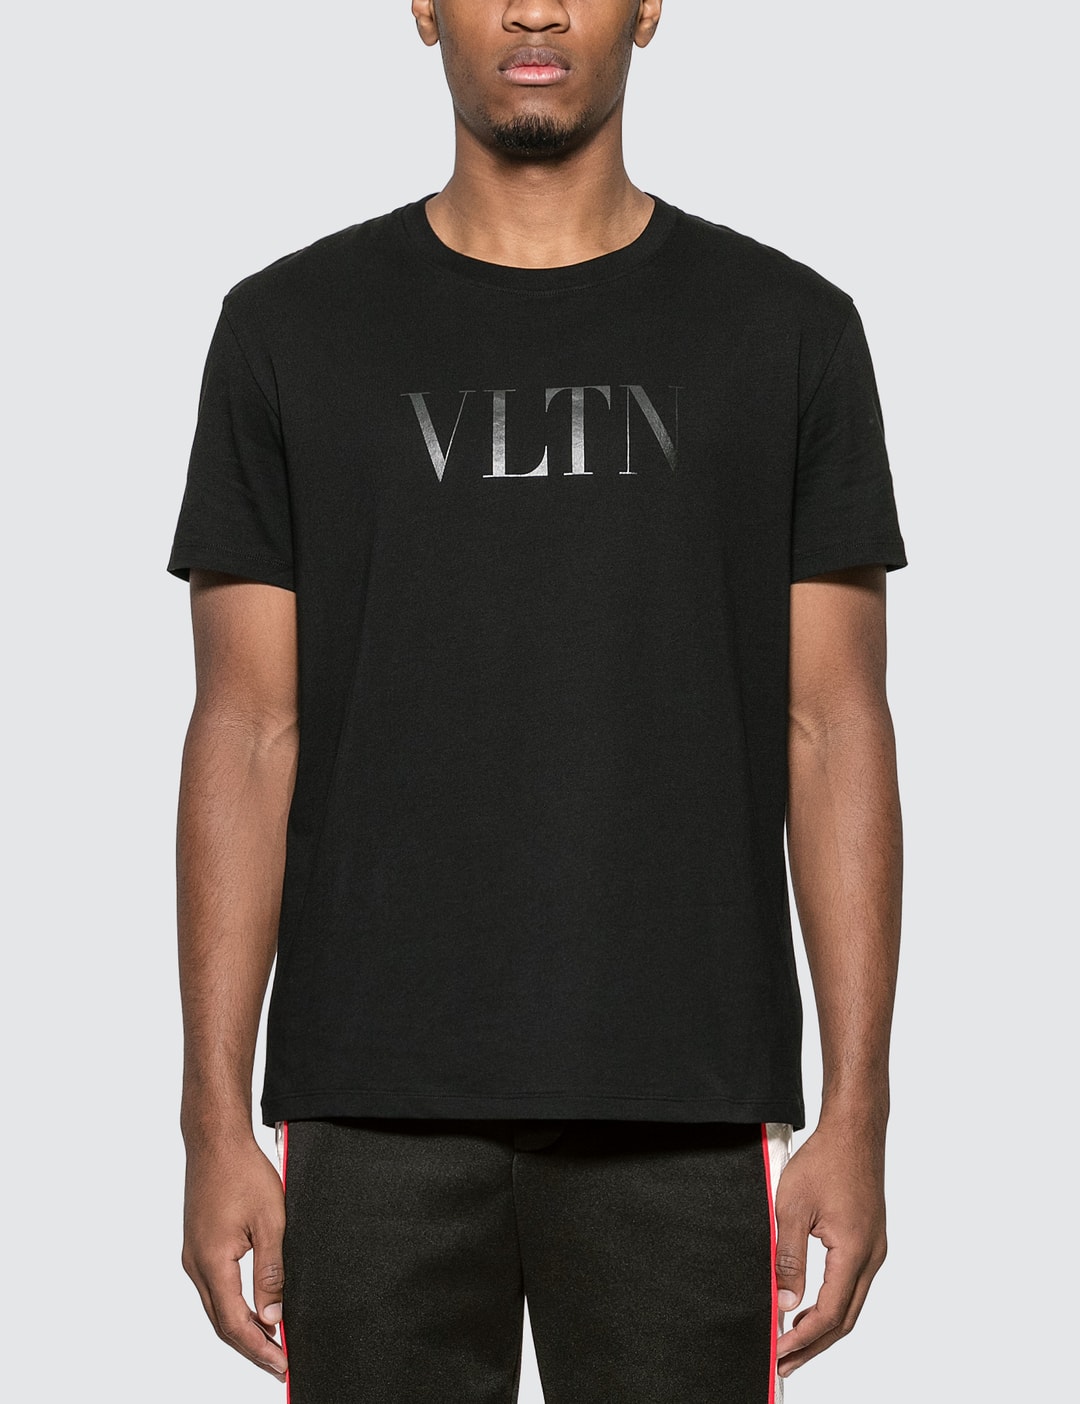 Valentino - VLTN T-Shirt HBX - Curated Fashion and by Hypebeast